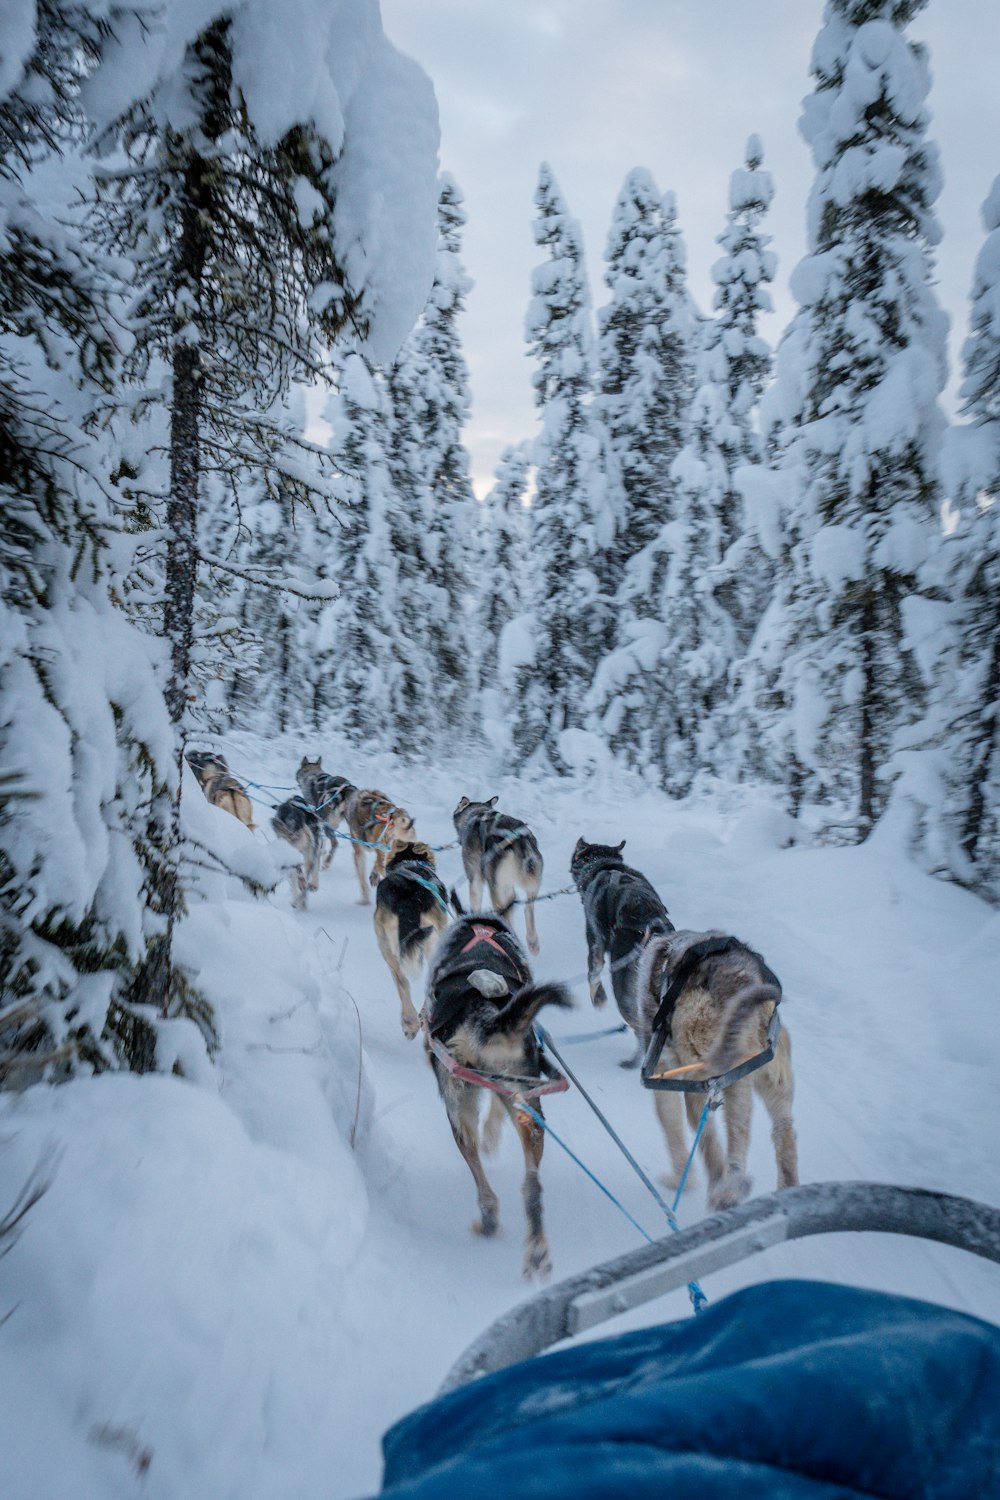 a man riding a sled pulled by dogs in the snow